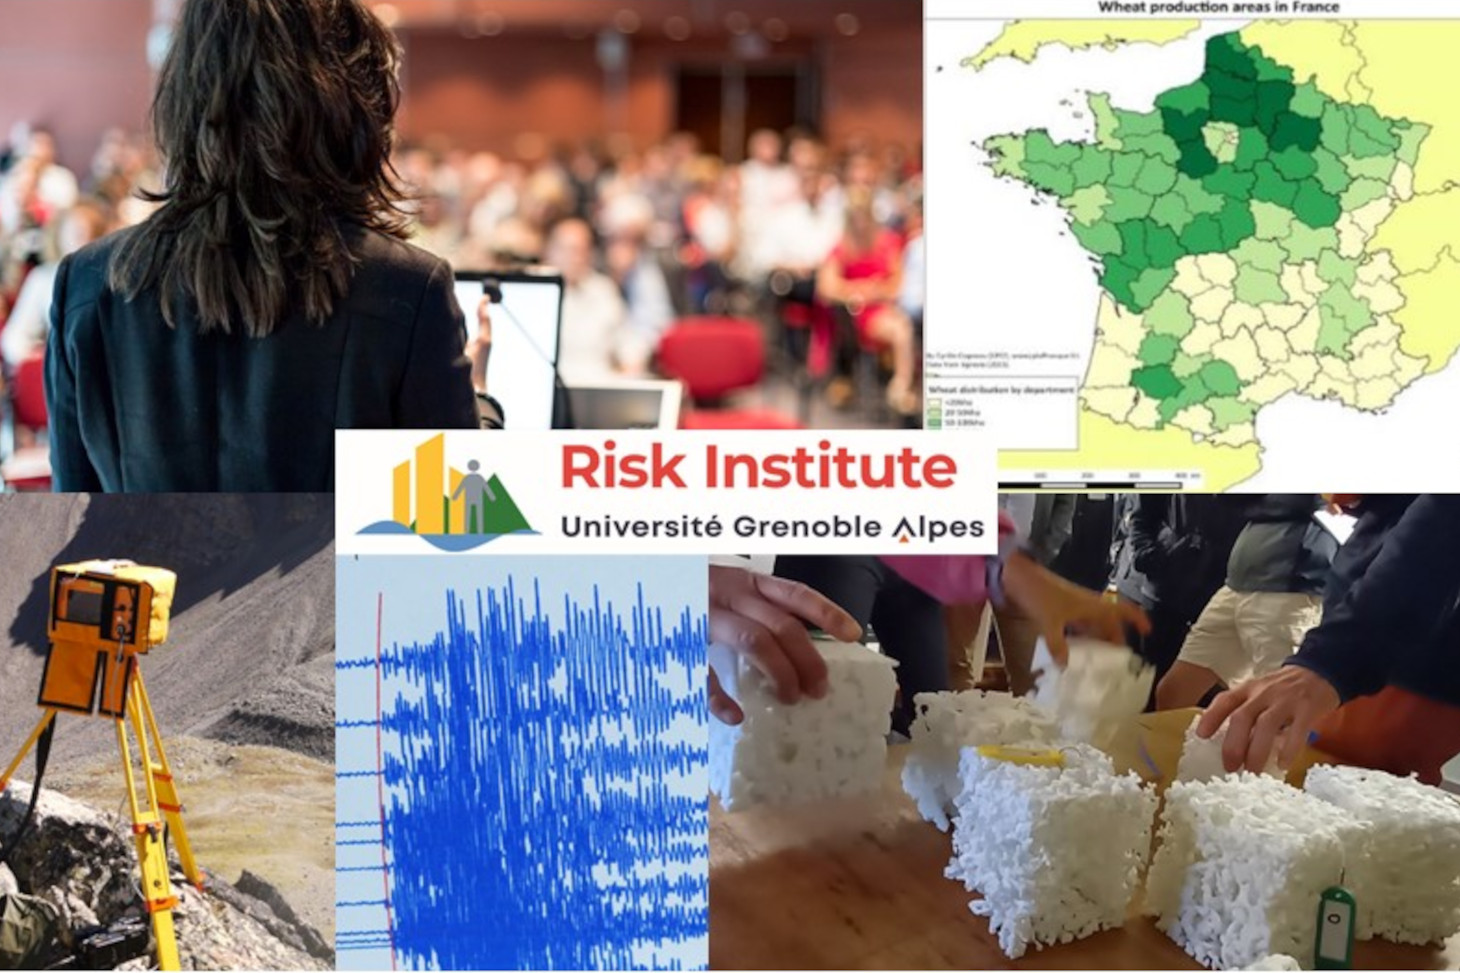 A RISK Institute project at Grenoble Alpes University (France)